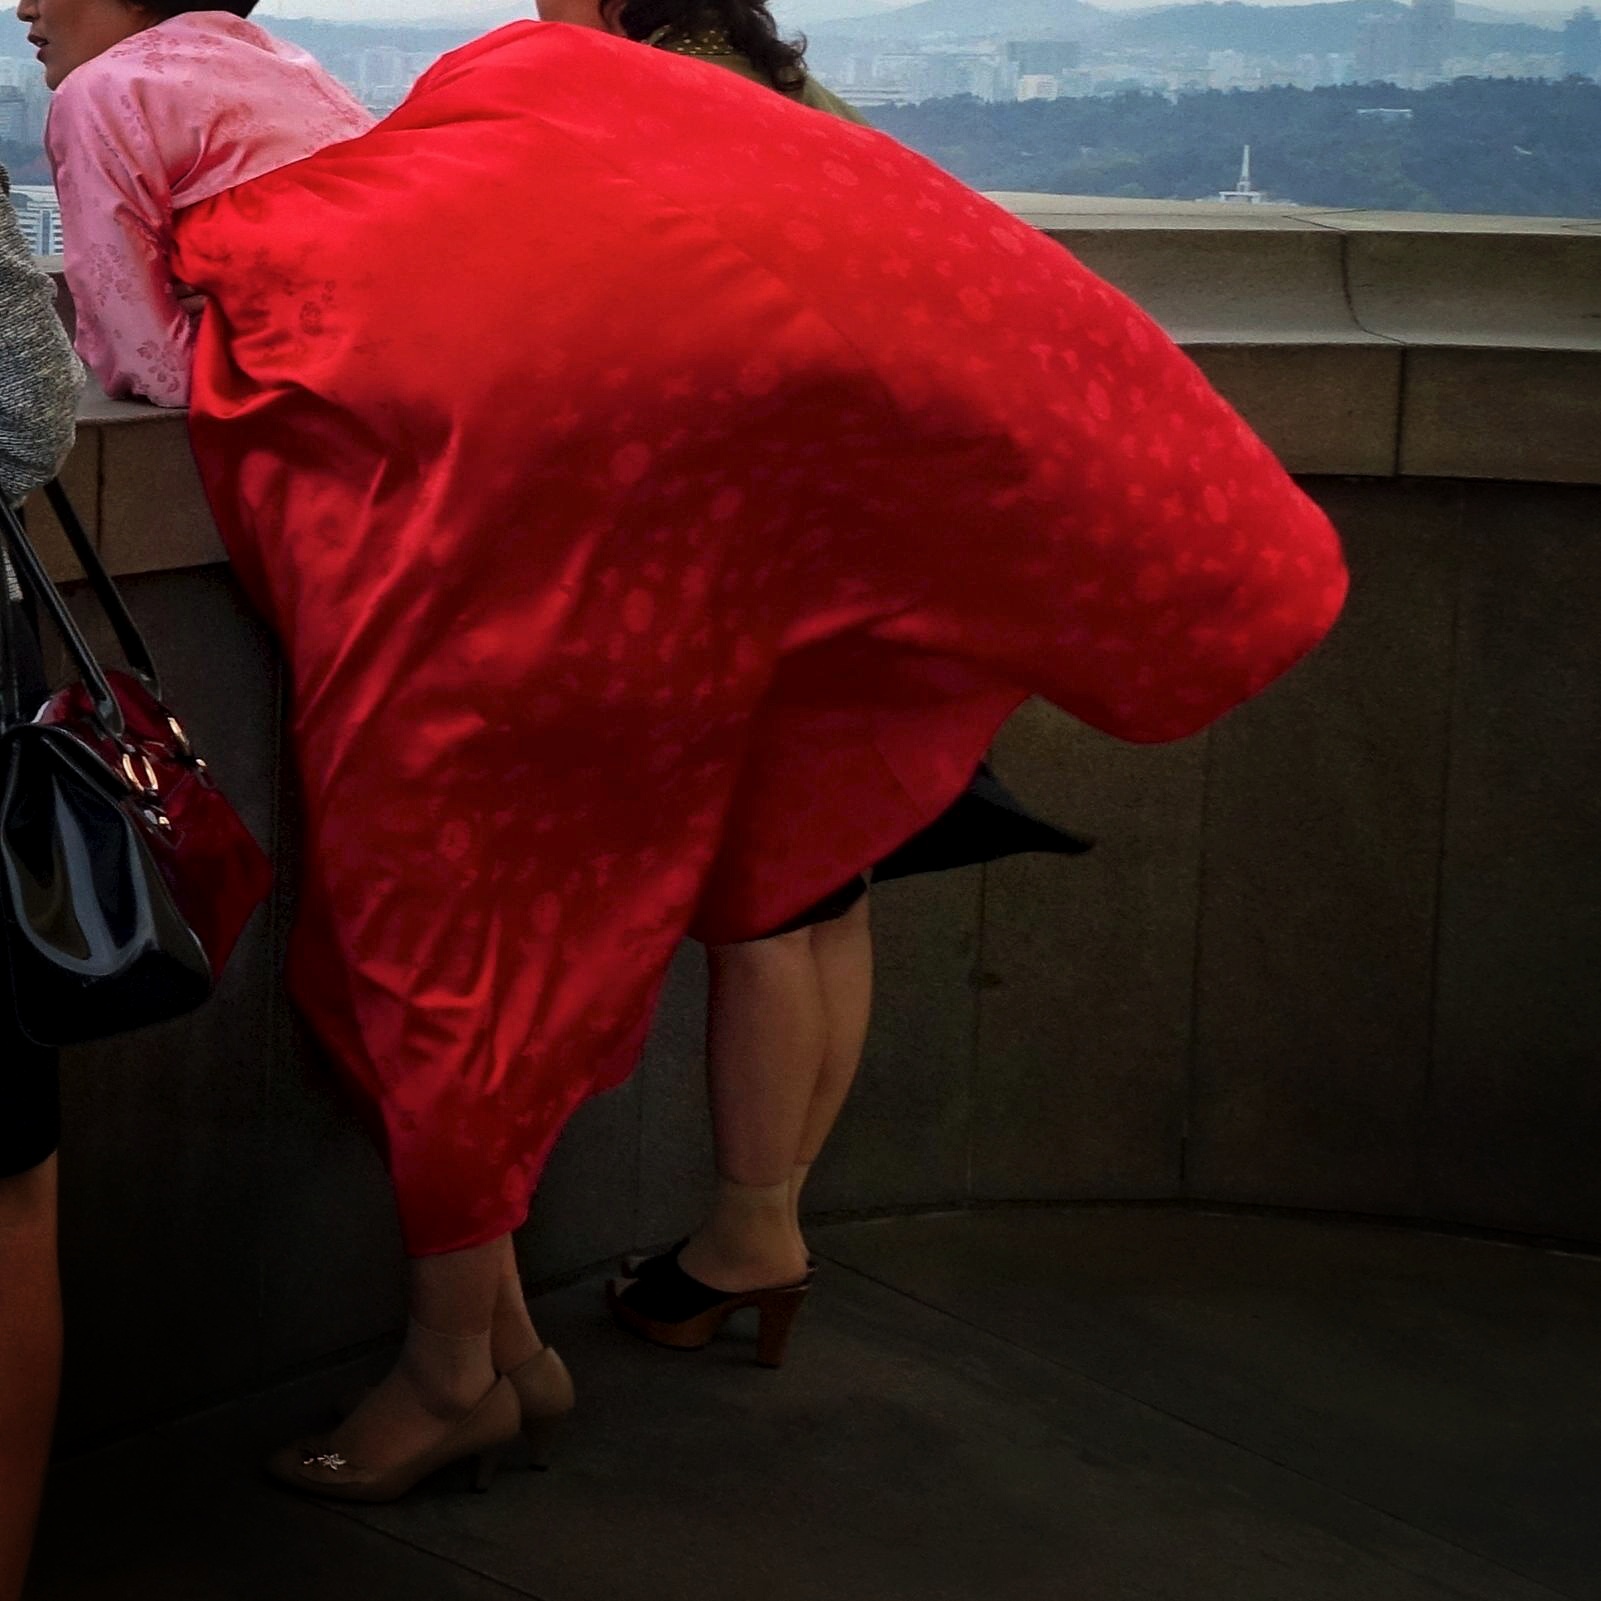 TIME LightBox: Using Instagram to Open a Window on Everyday Life in North KoreaA woman's traditional dress billows in the strong breeze on top of Juche Tower in Pyongyang.